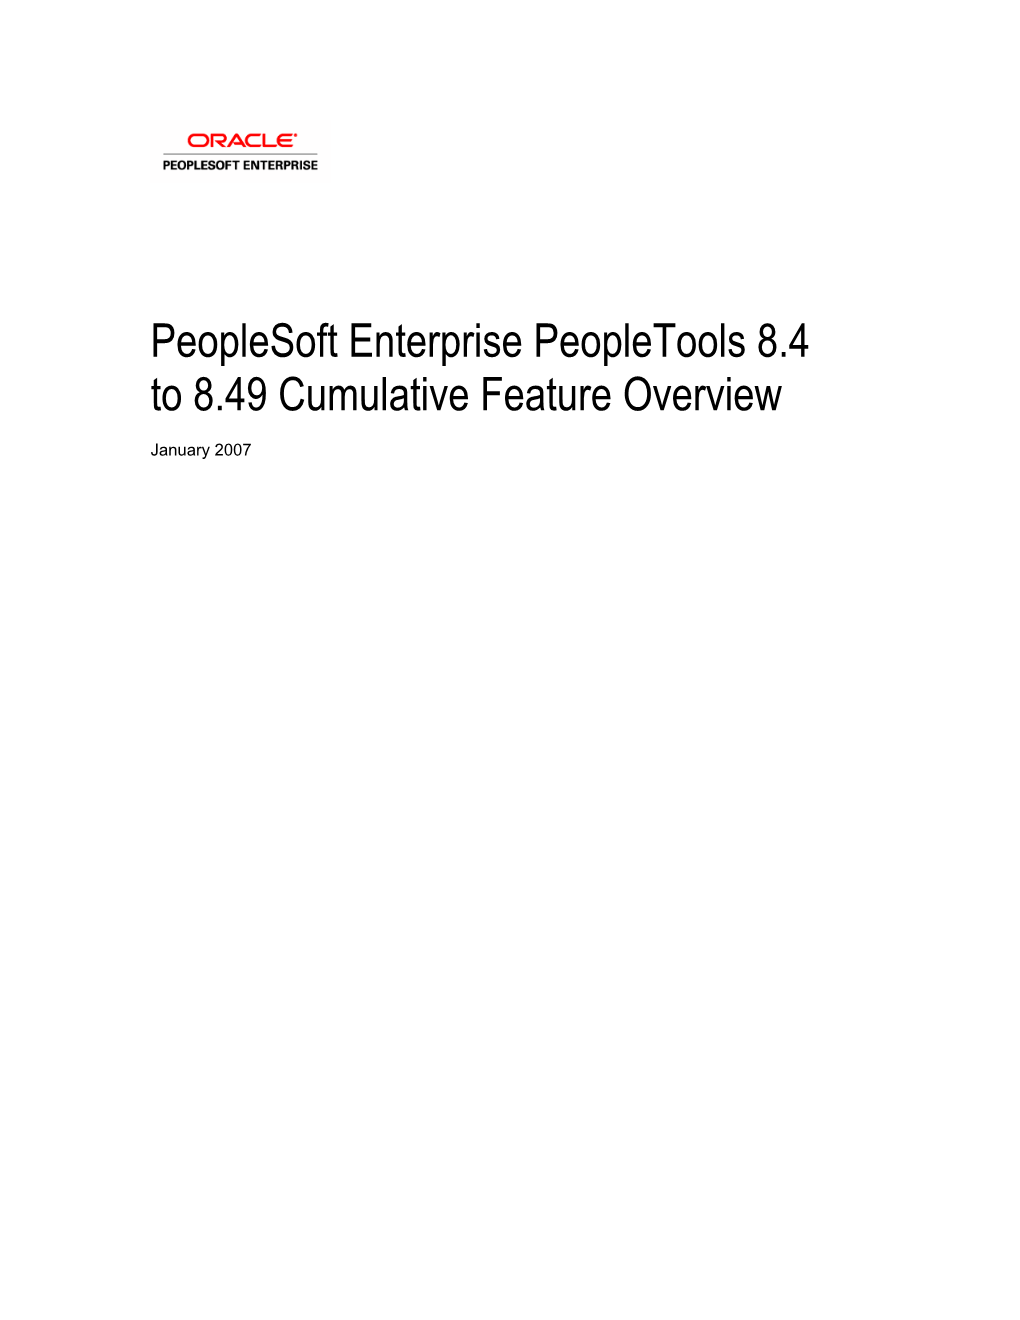 Peoplesoft Enterprise Peopletools 8.4 to 8.49 Cumulative Feature Overview